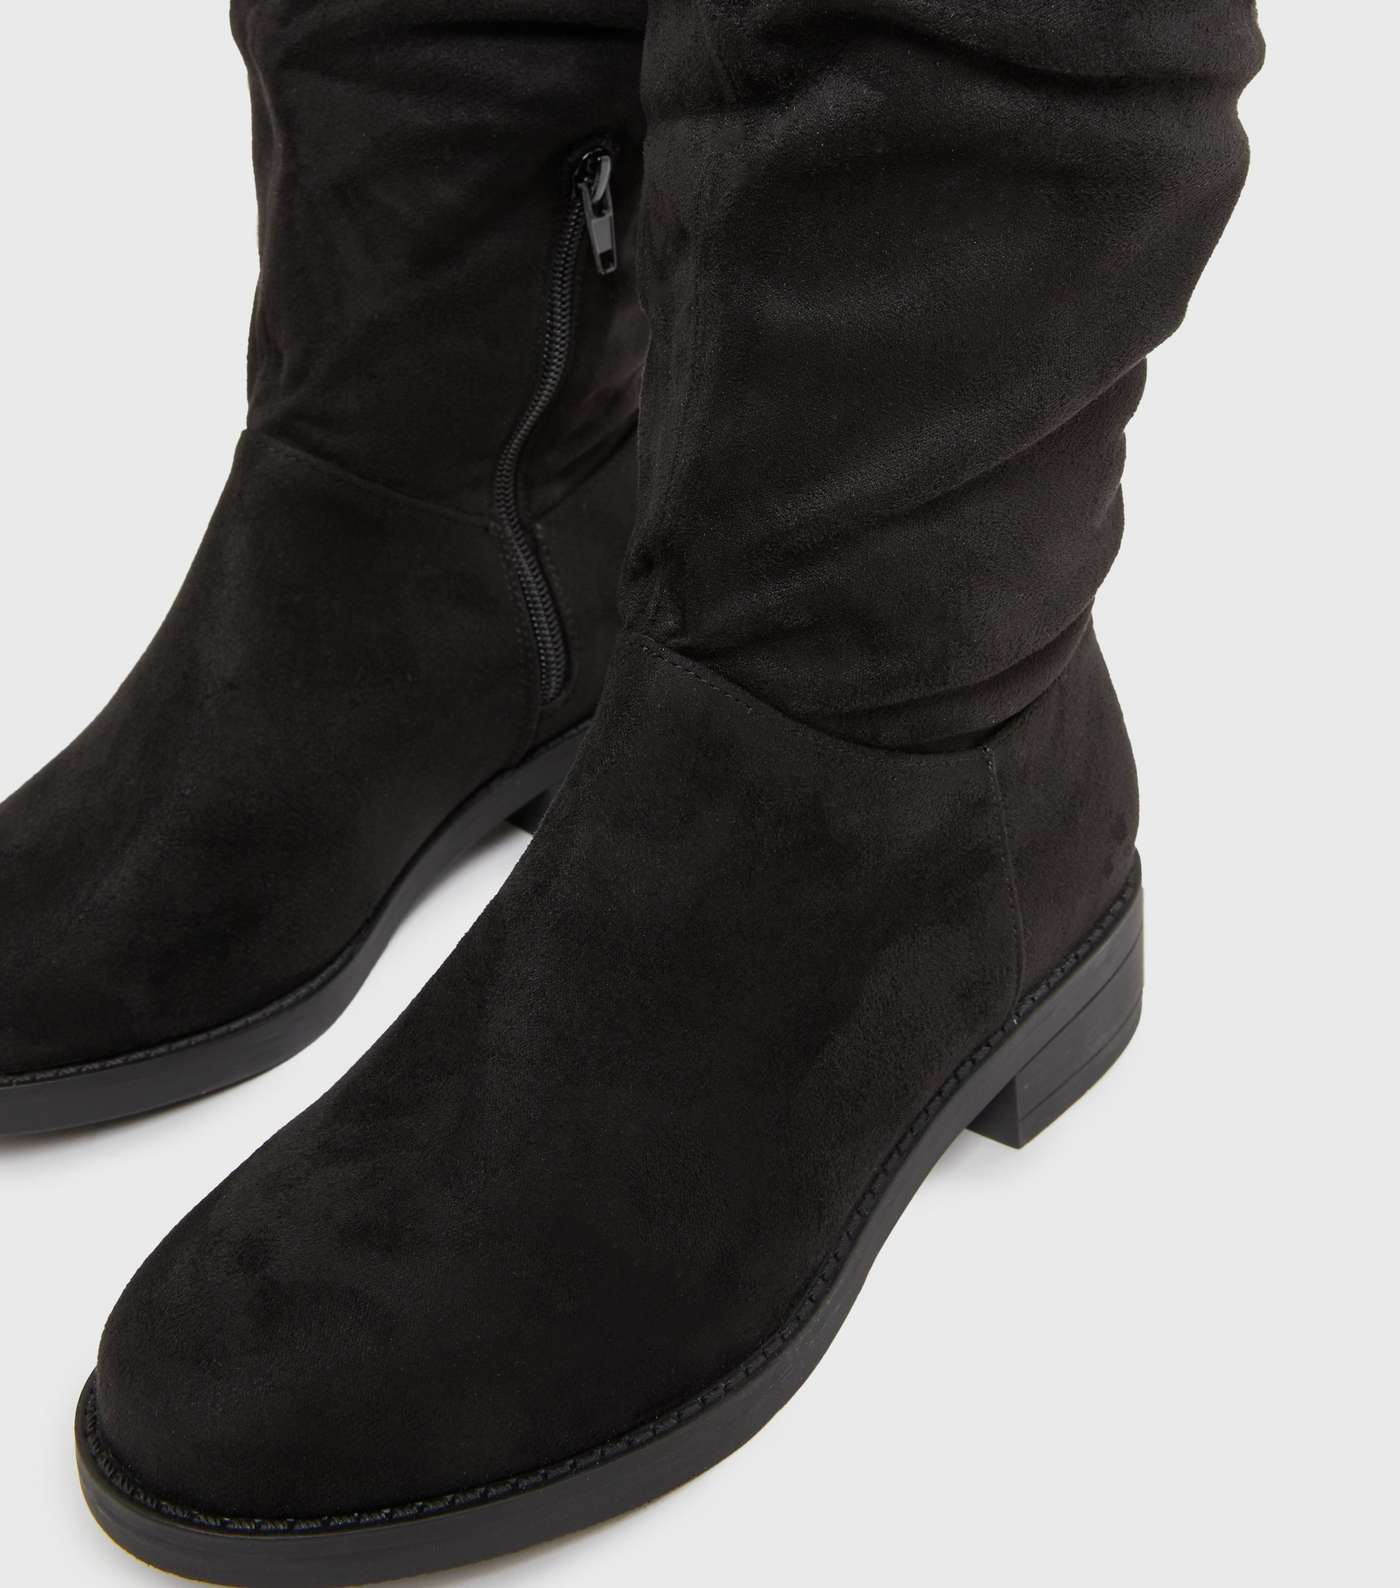 Extra Calf Fit Black Suedette Slouch Calf Boots Image 4